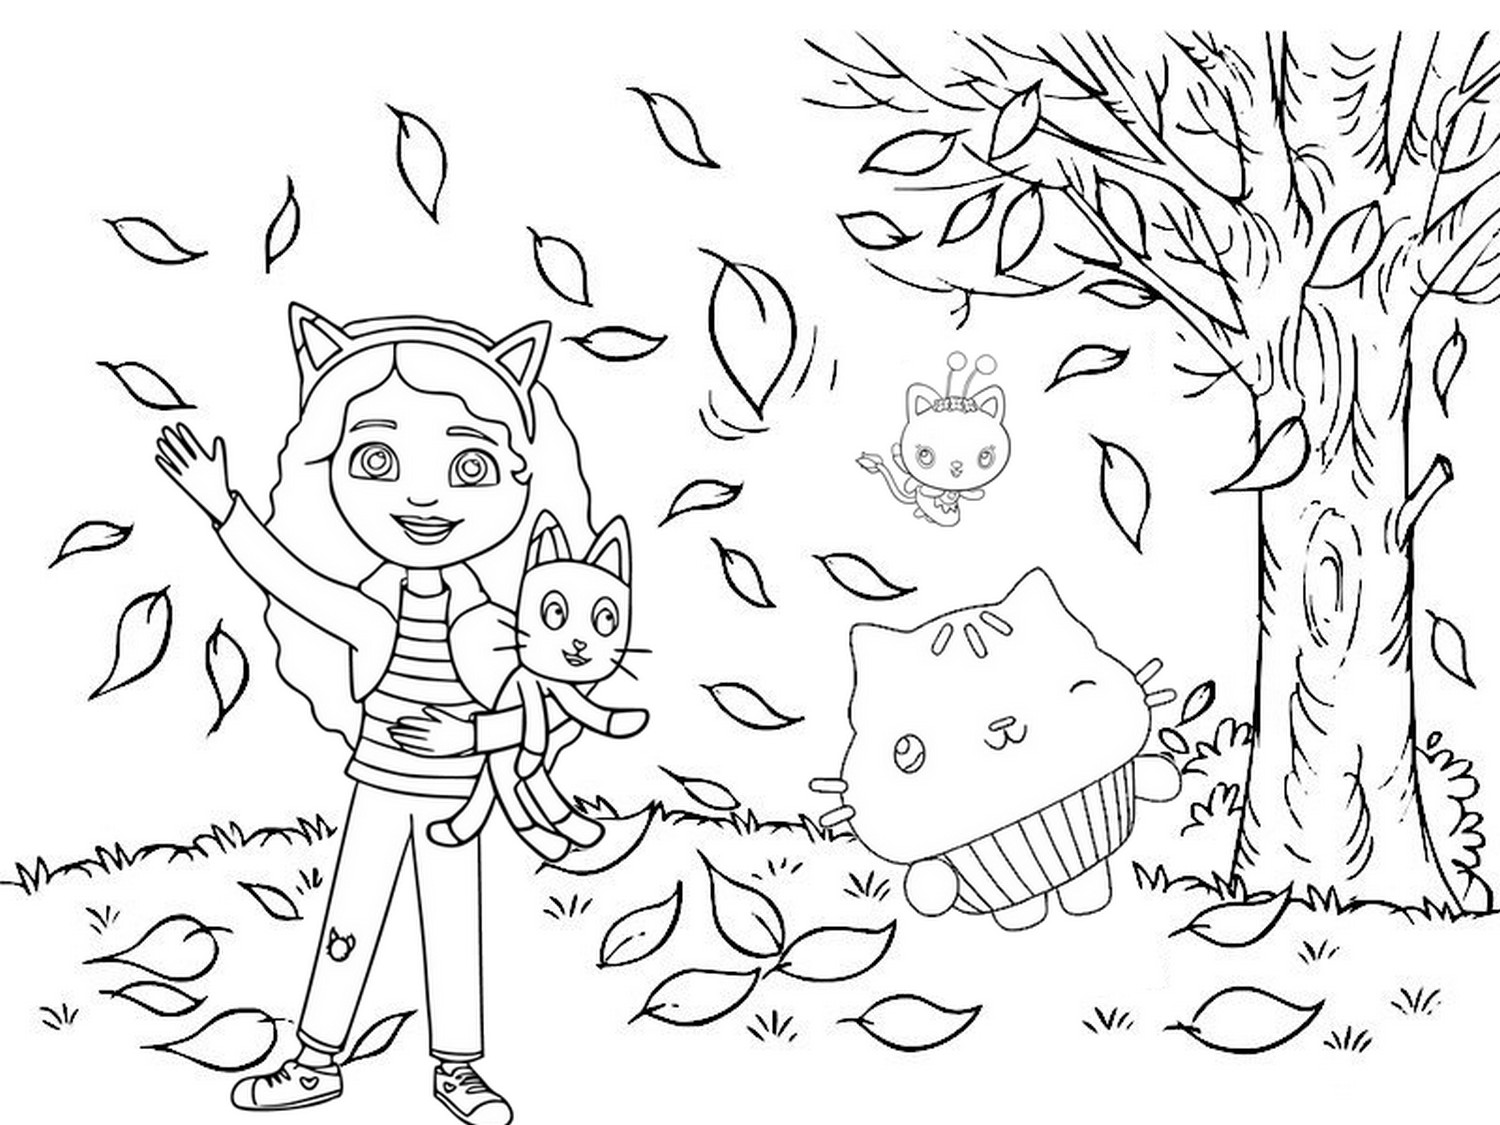 Coloring page Autumn